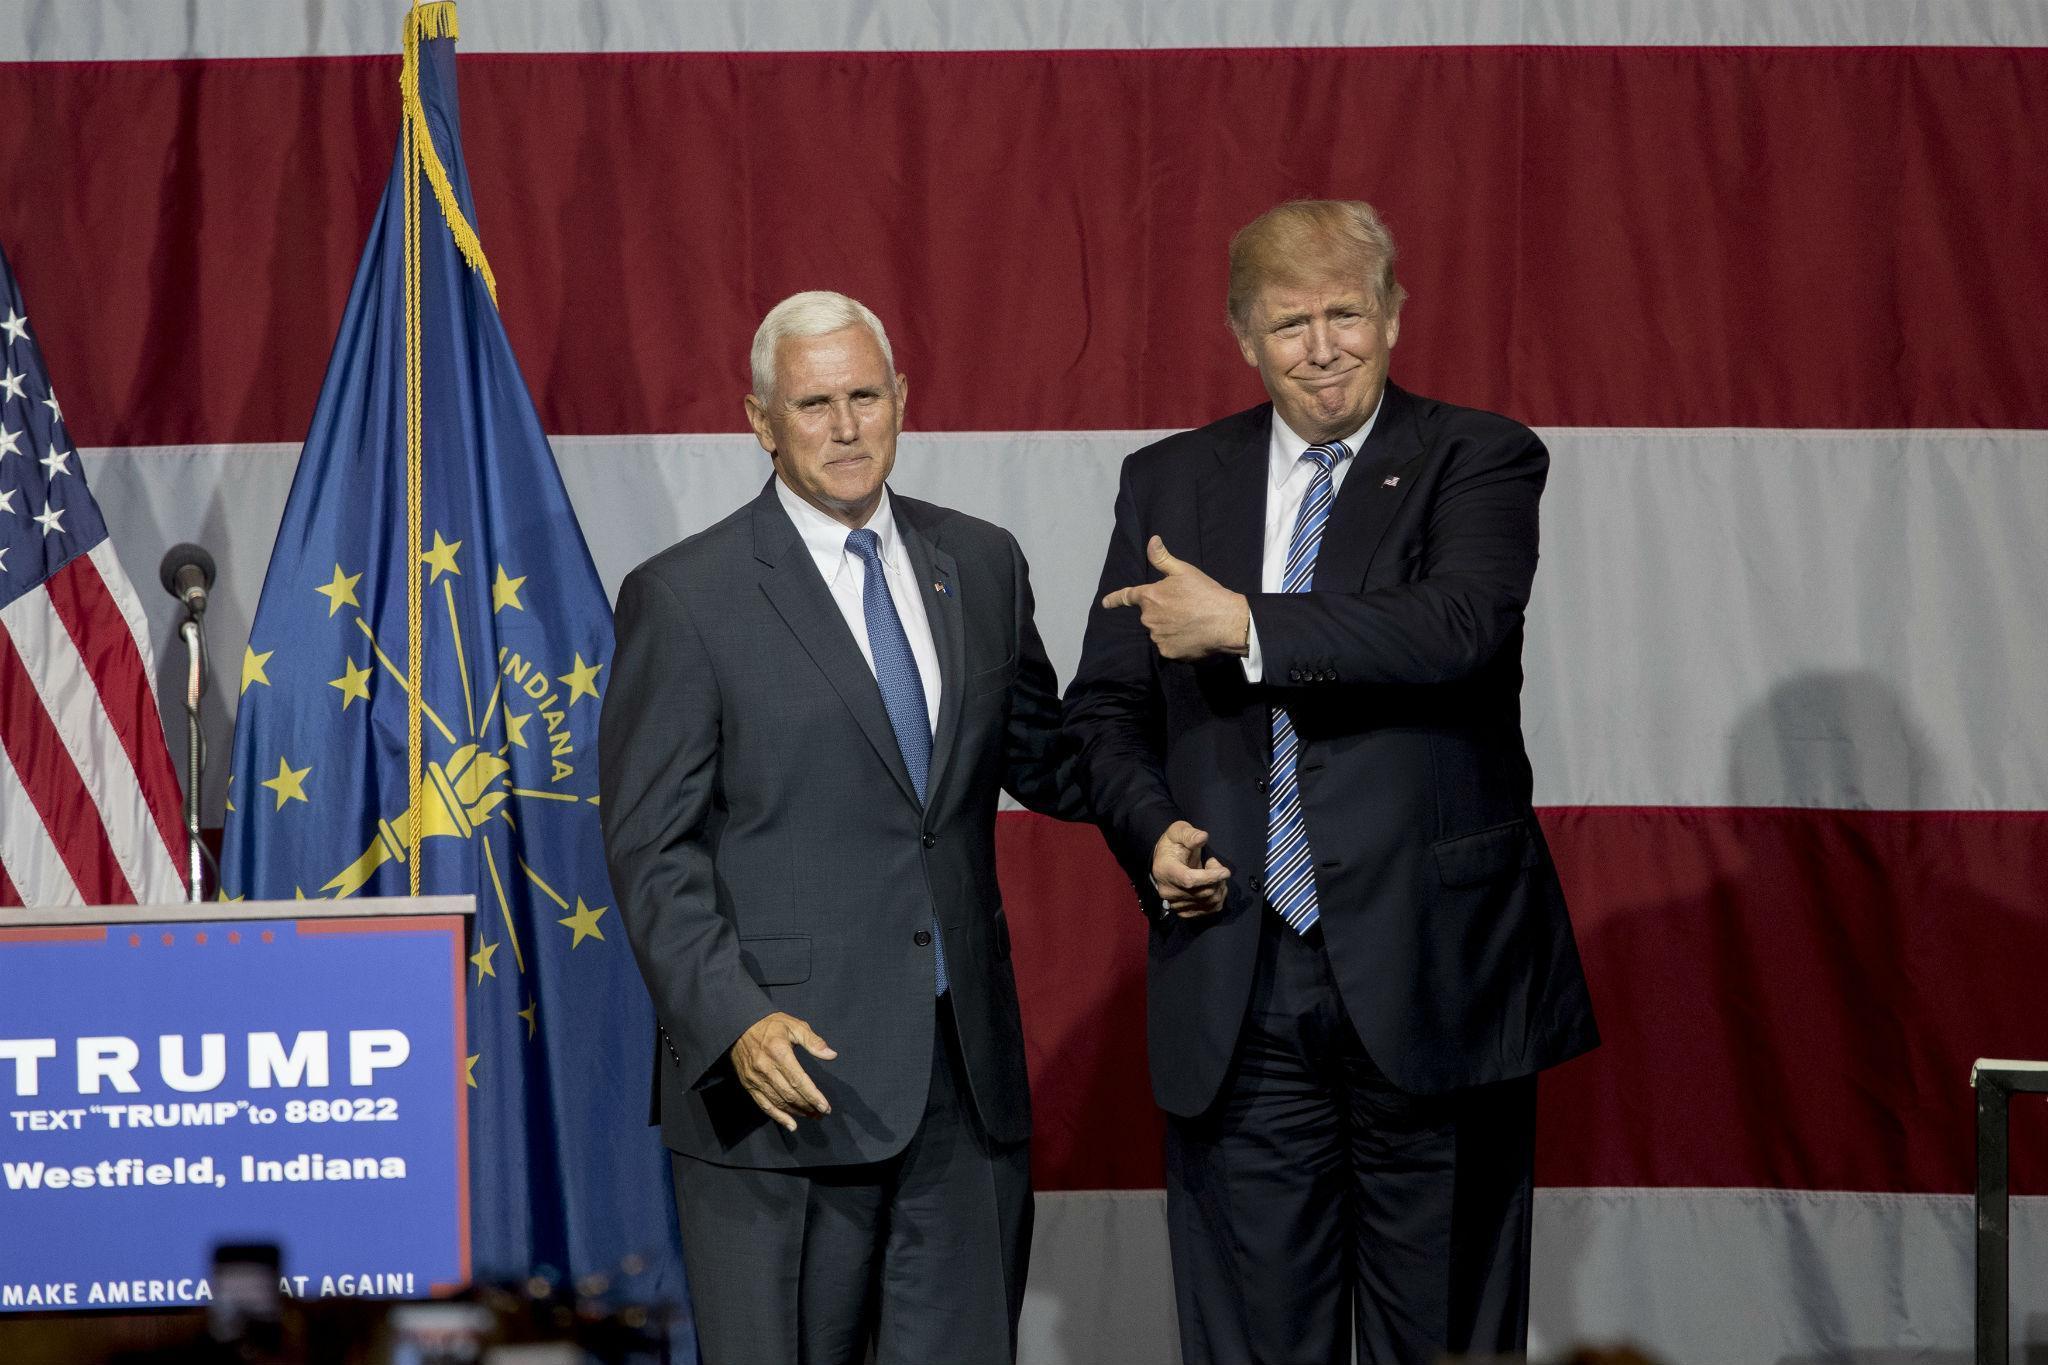 Mr Trump has reportedly tapped Indiana Governor Mike Pence, left, as his vice-presidential pick, after considering former House Speaker Newt Gingrich and New Jersey Governor Chris Christie